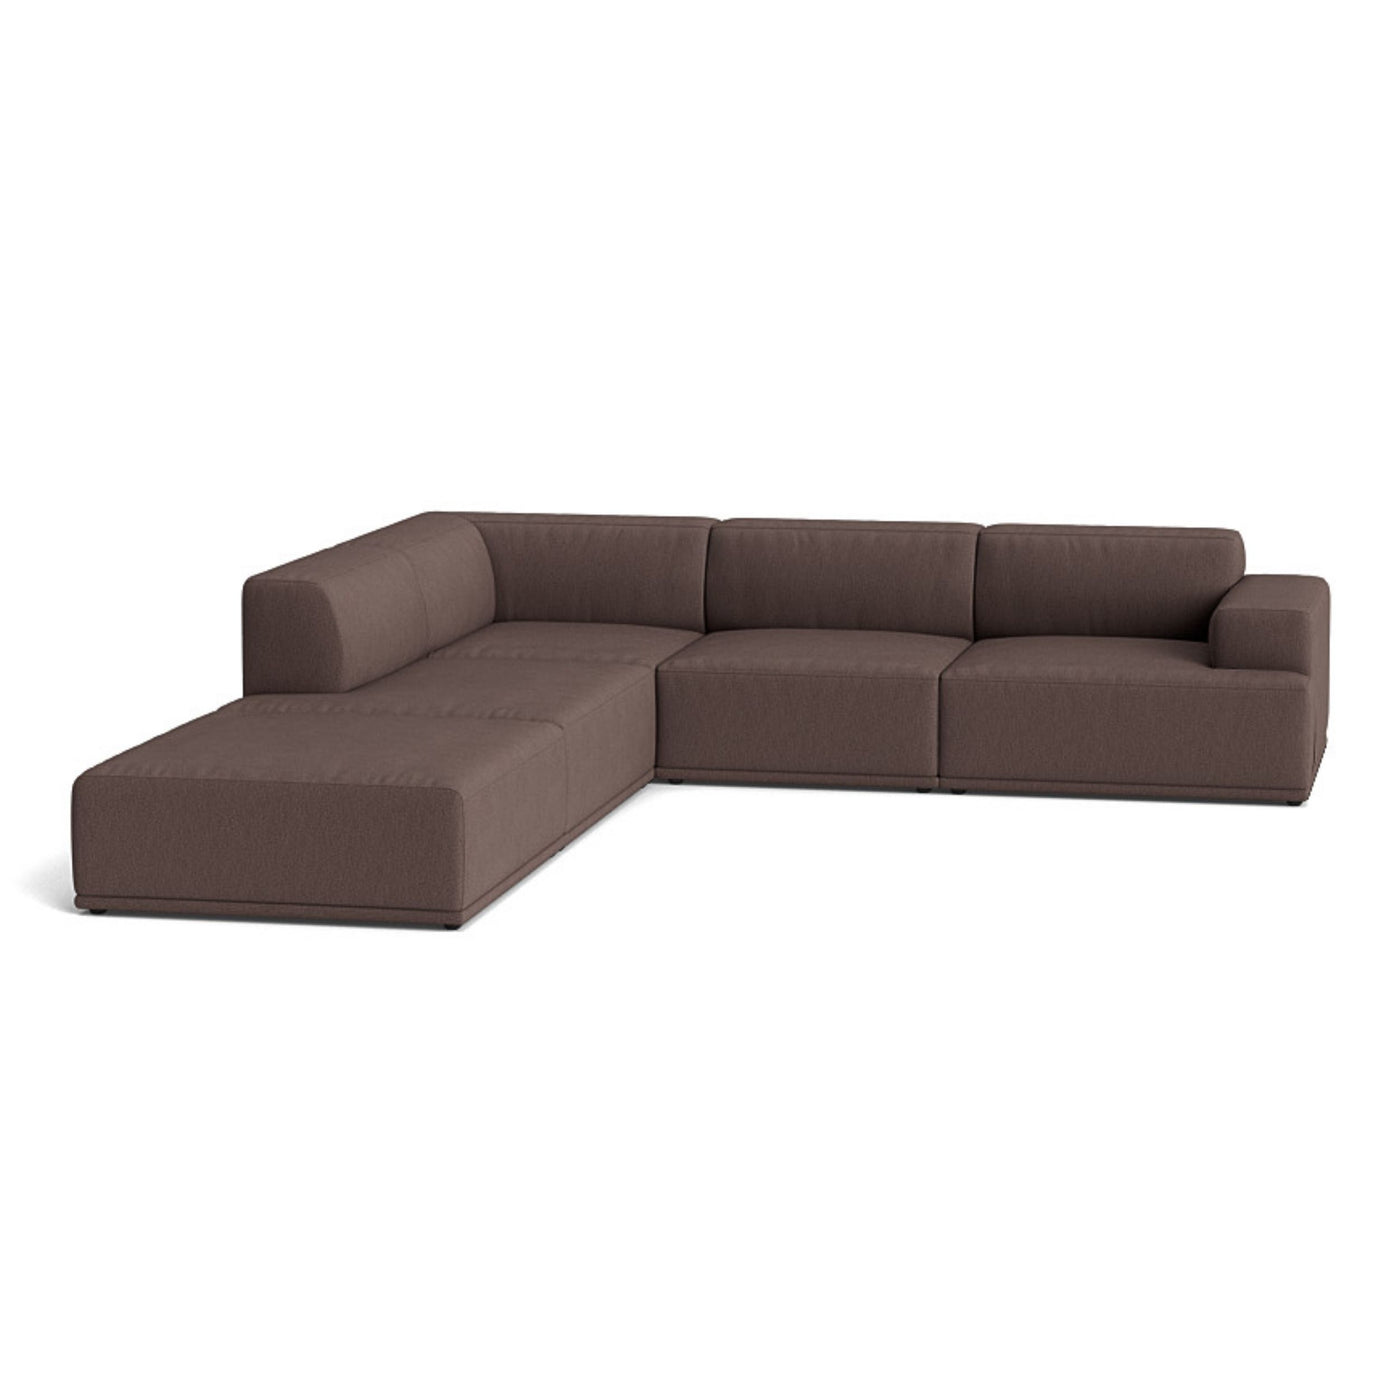 Muuto Connect Soft Modular Corner Sofa, configuration 1. Made-to-order from someday designs. #colour_clay-6-red-brown